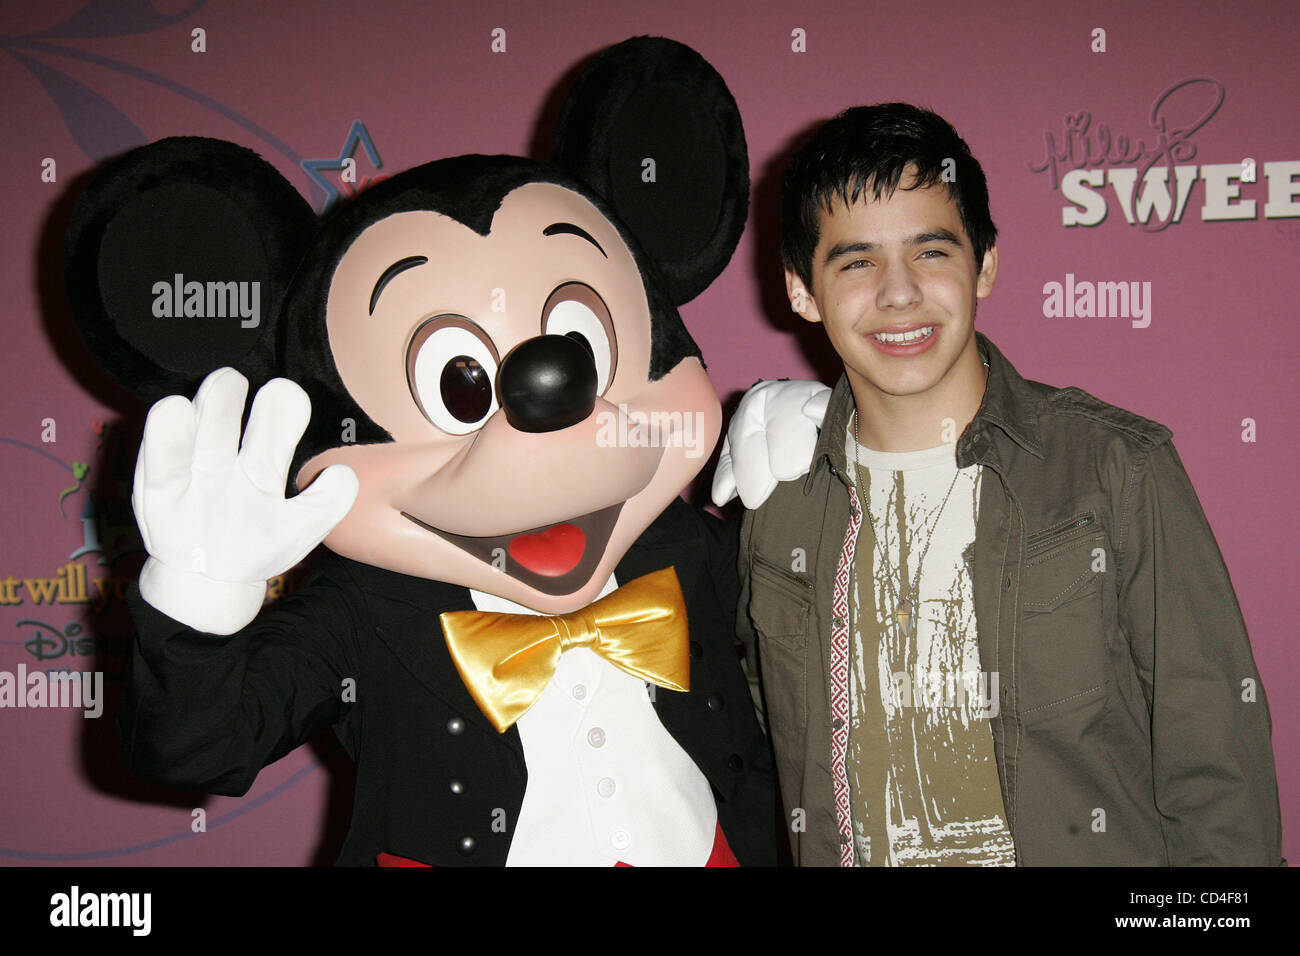 Oct 05, 2008 - Anaheim, California, USA - DAVID ARCHULETA with MICKEY MOUSE at the Miley Cyrus Sweet 16 Birthday Party held at Disneyland in Anaheim. (Credit Image: © Lisa O'Connor/ZUMA Press) Stock Photo